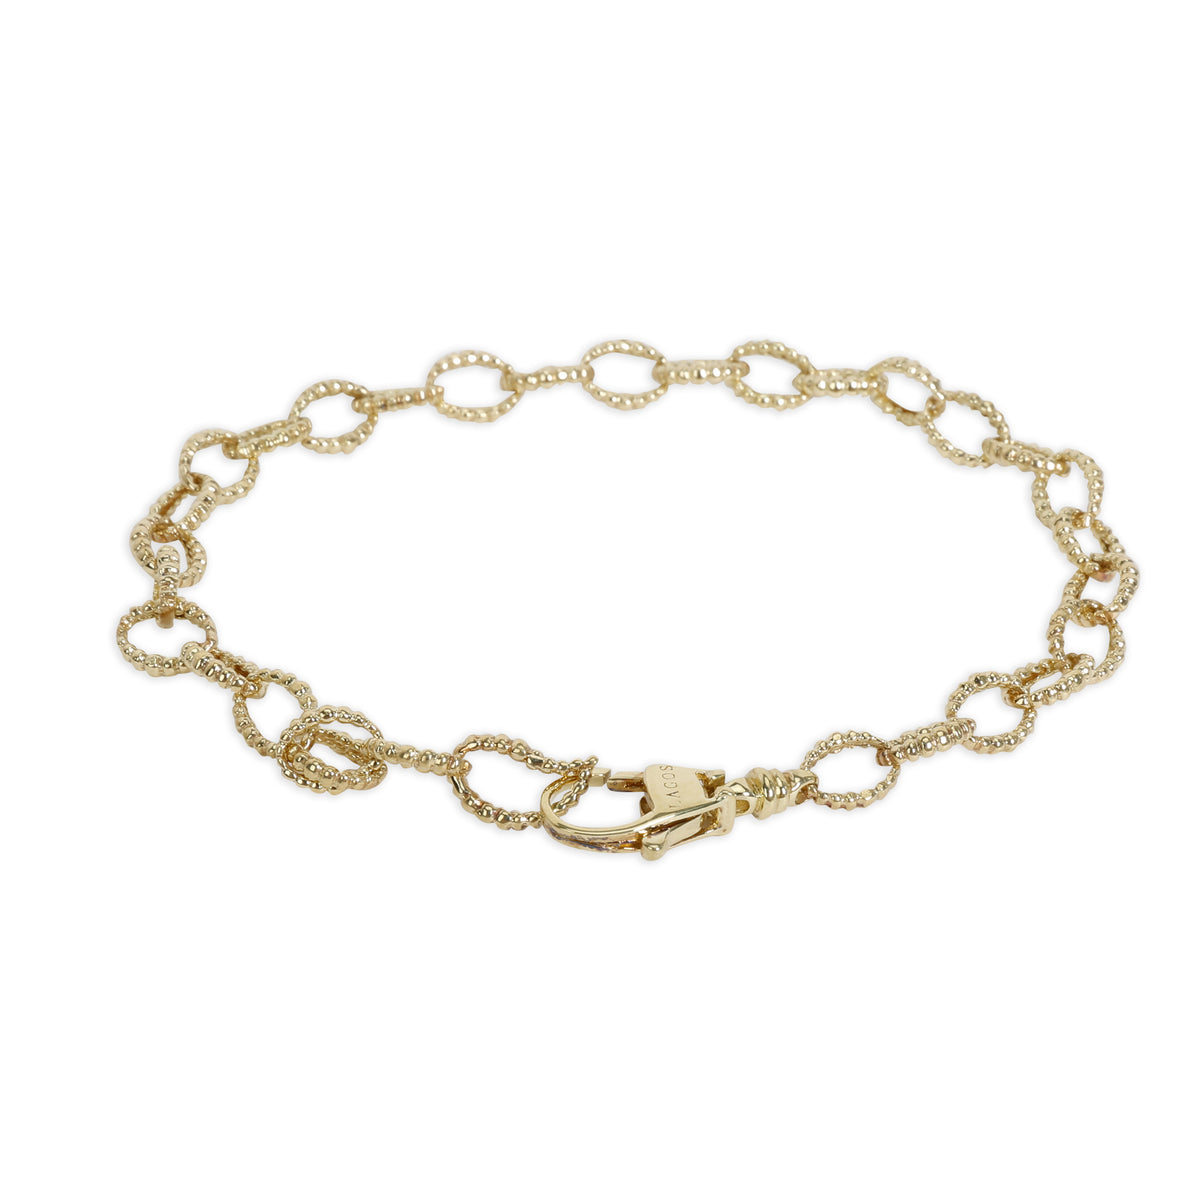 Lagos Caviar Collection Fluted Oval Link Bracelet in 18K Yellow Gold